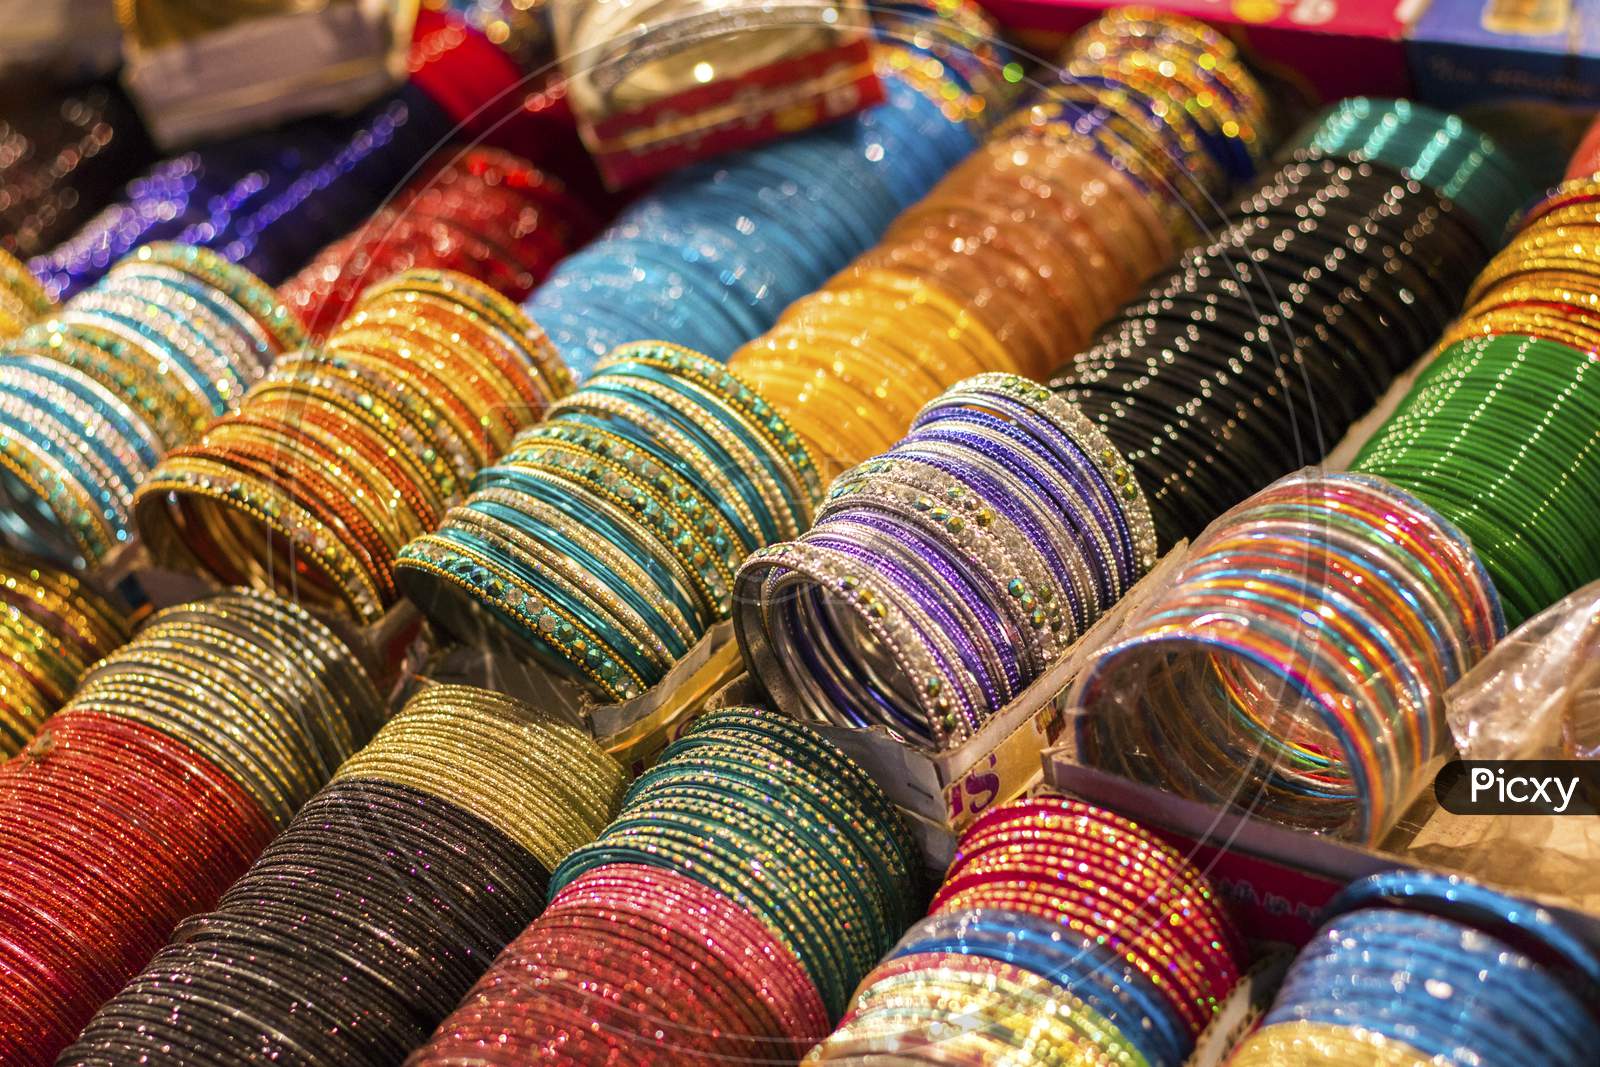 Multi-Colored Indian Glass/Metal Bangles Arranged On The Shelf For Sale